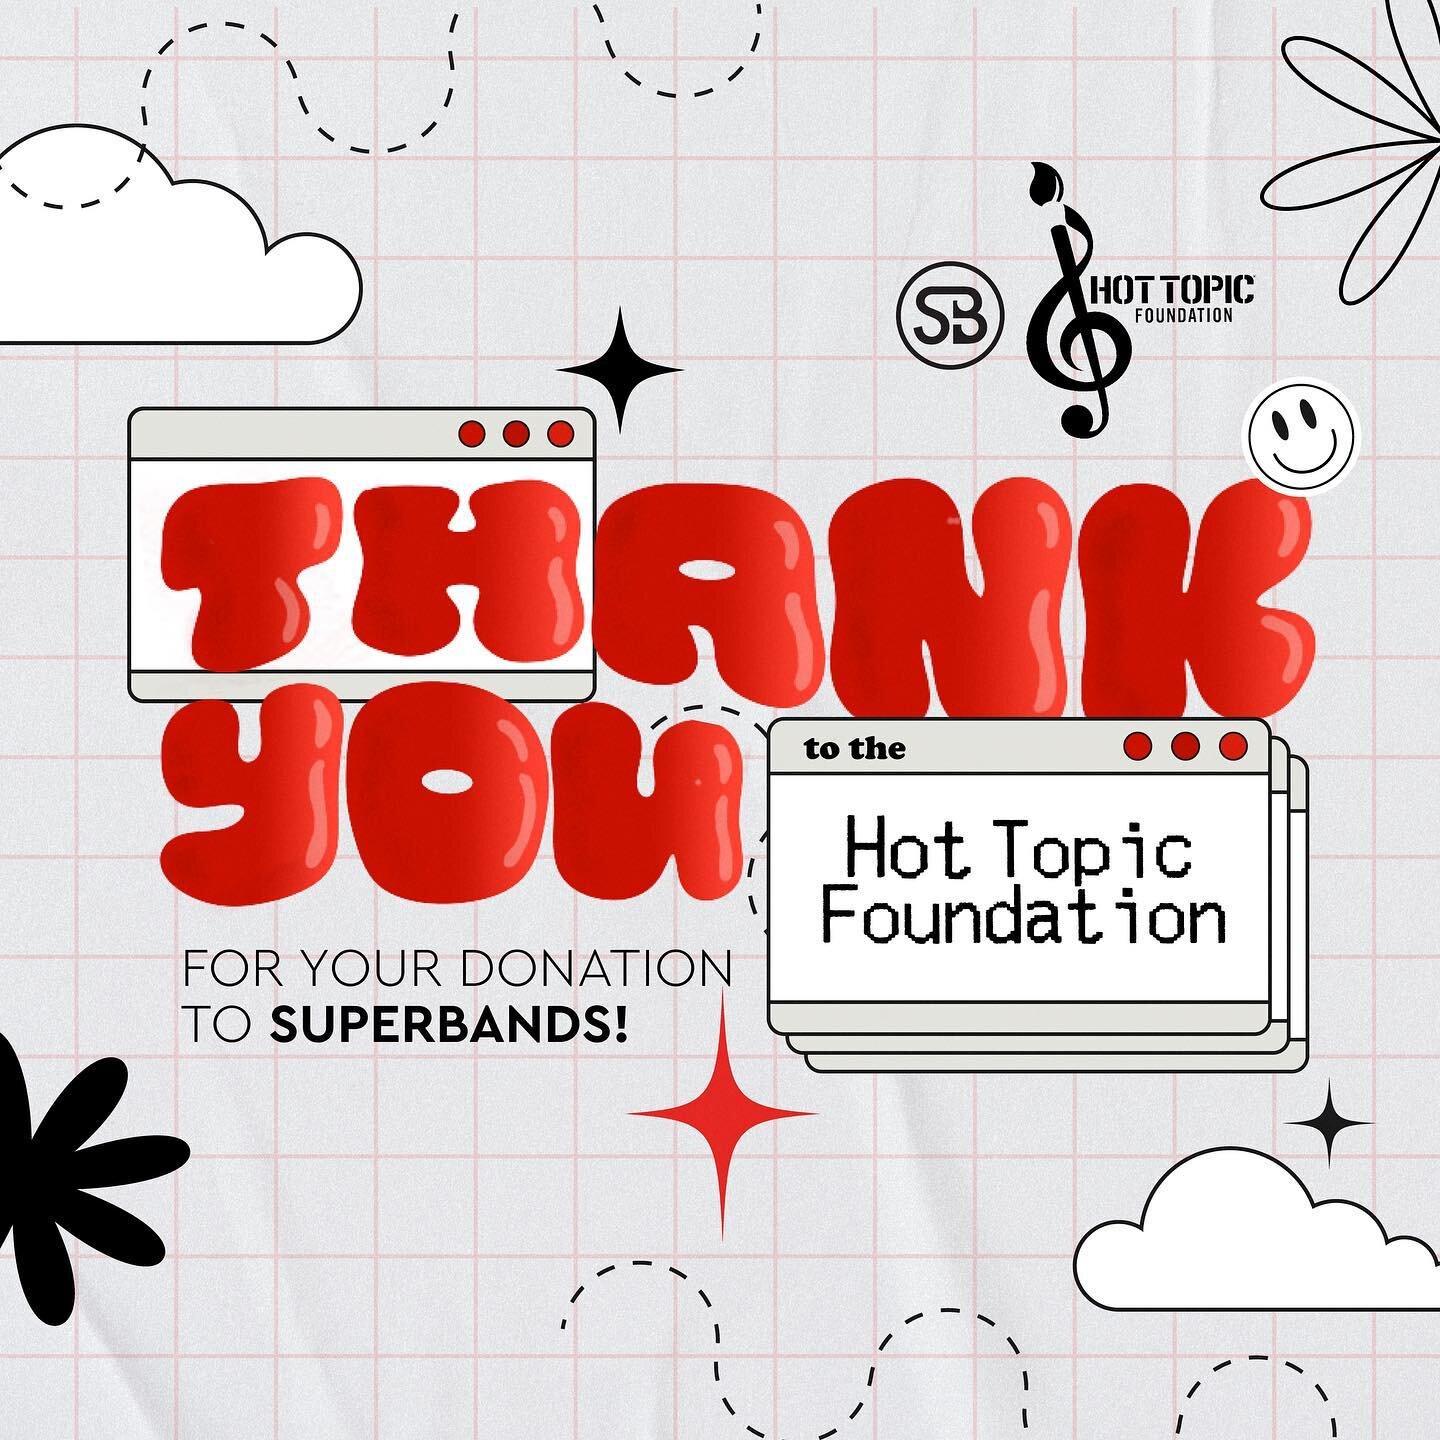 We are so incredibly grateful to our amazing friends at the @HotTopic Foundation for their generous grant this summer! Thanks to their help, we will be able to move forward in granting wishes for young teen music fans to give them hope during difficu